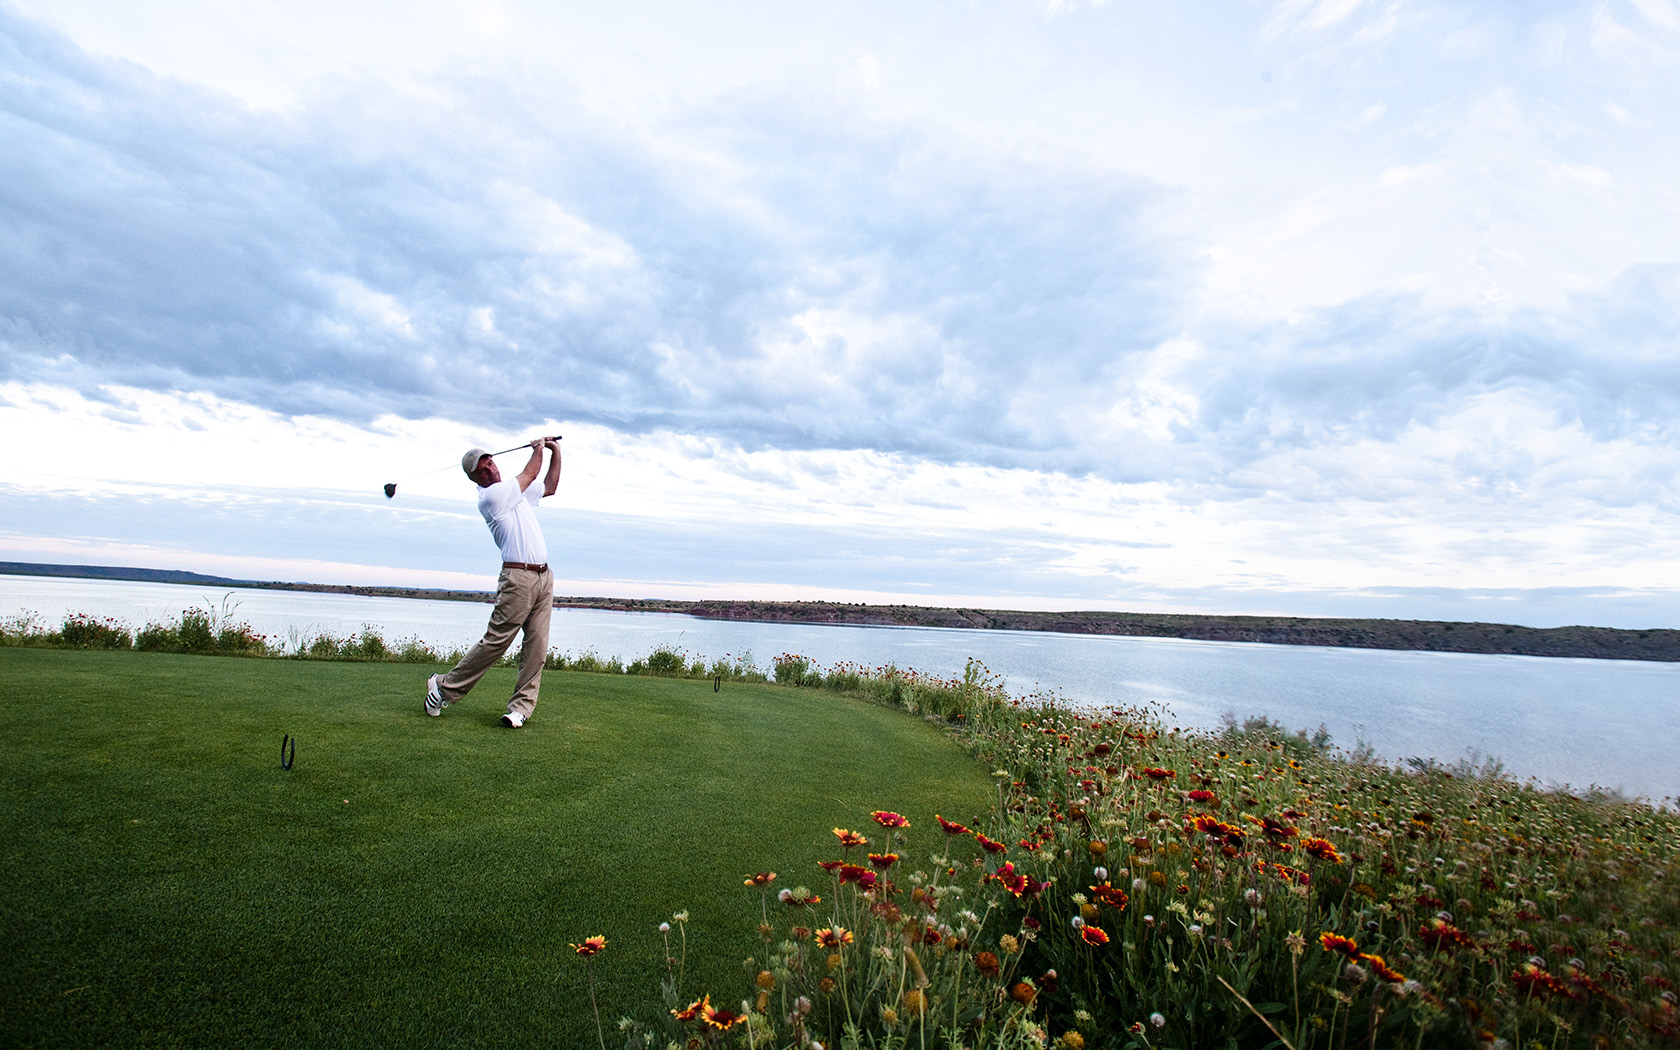 a man finishing his swing on the putting green located near a large body of water